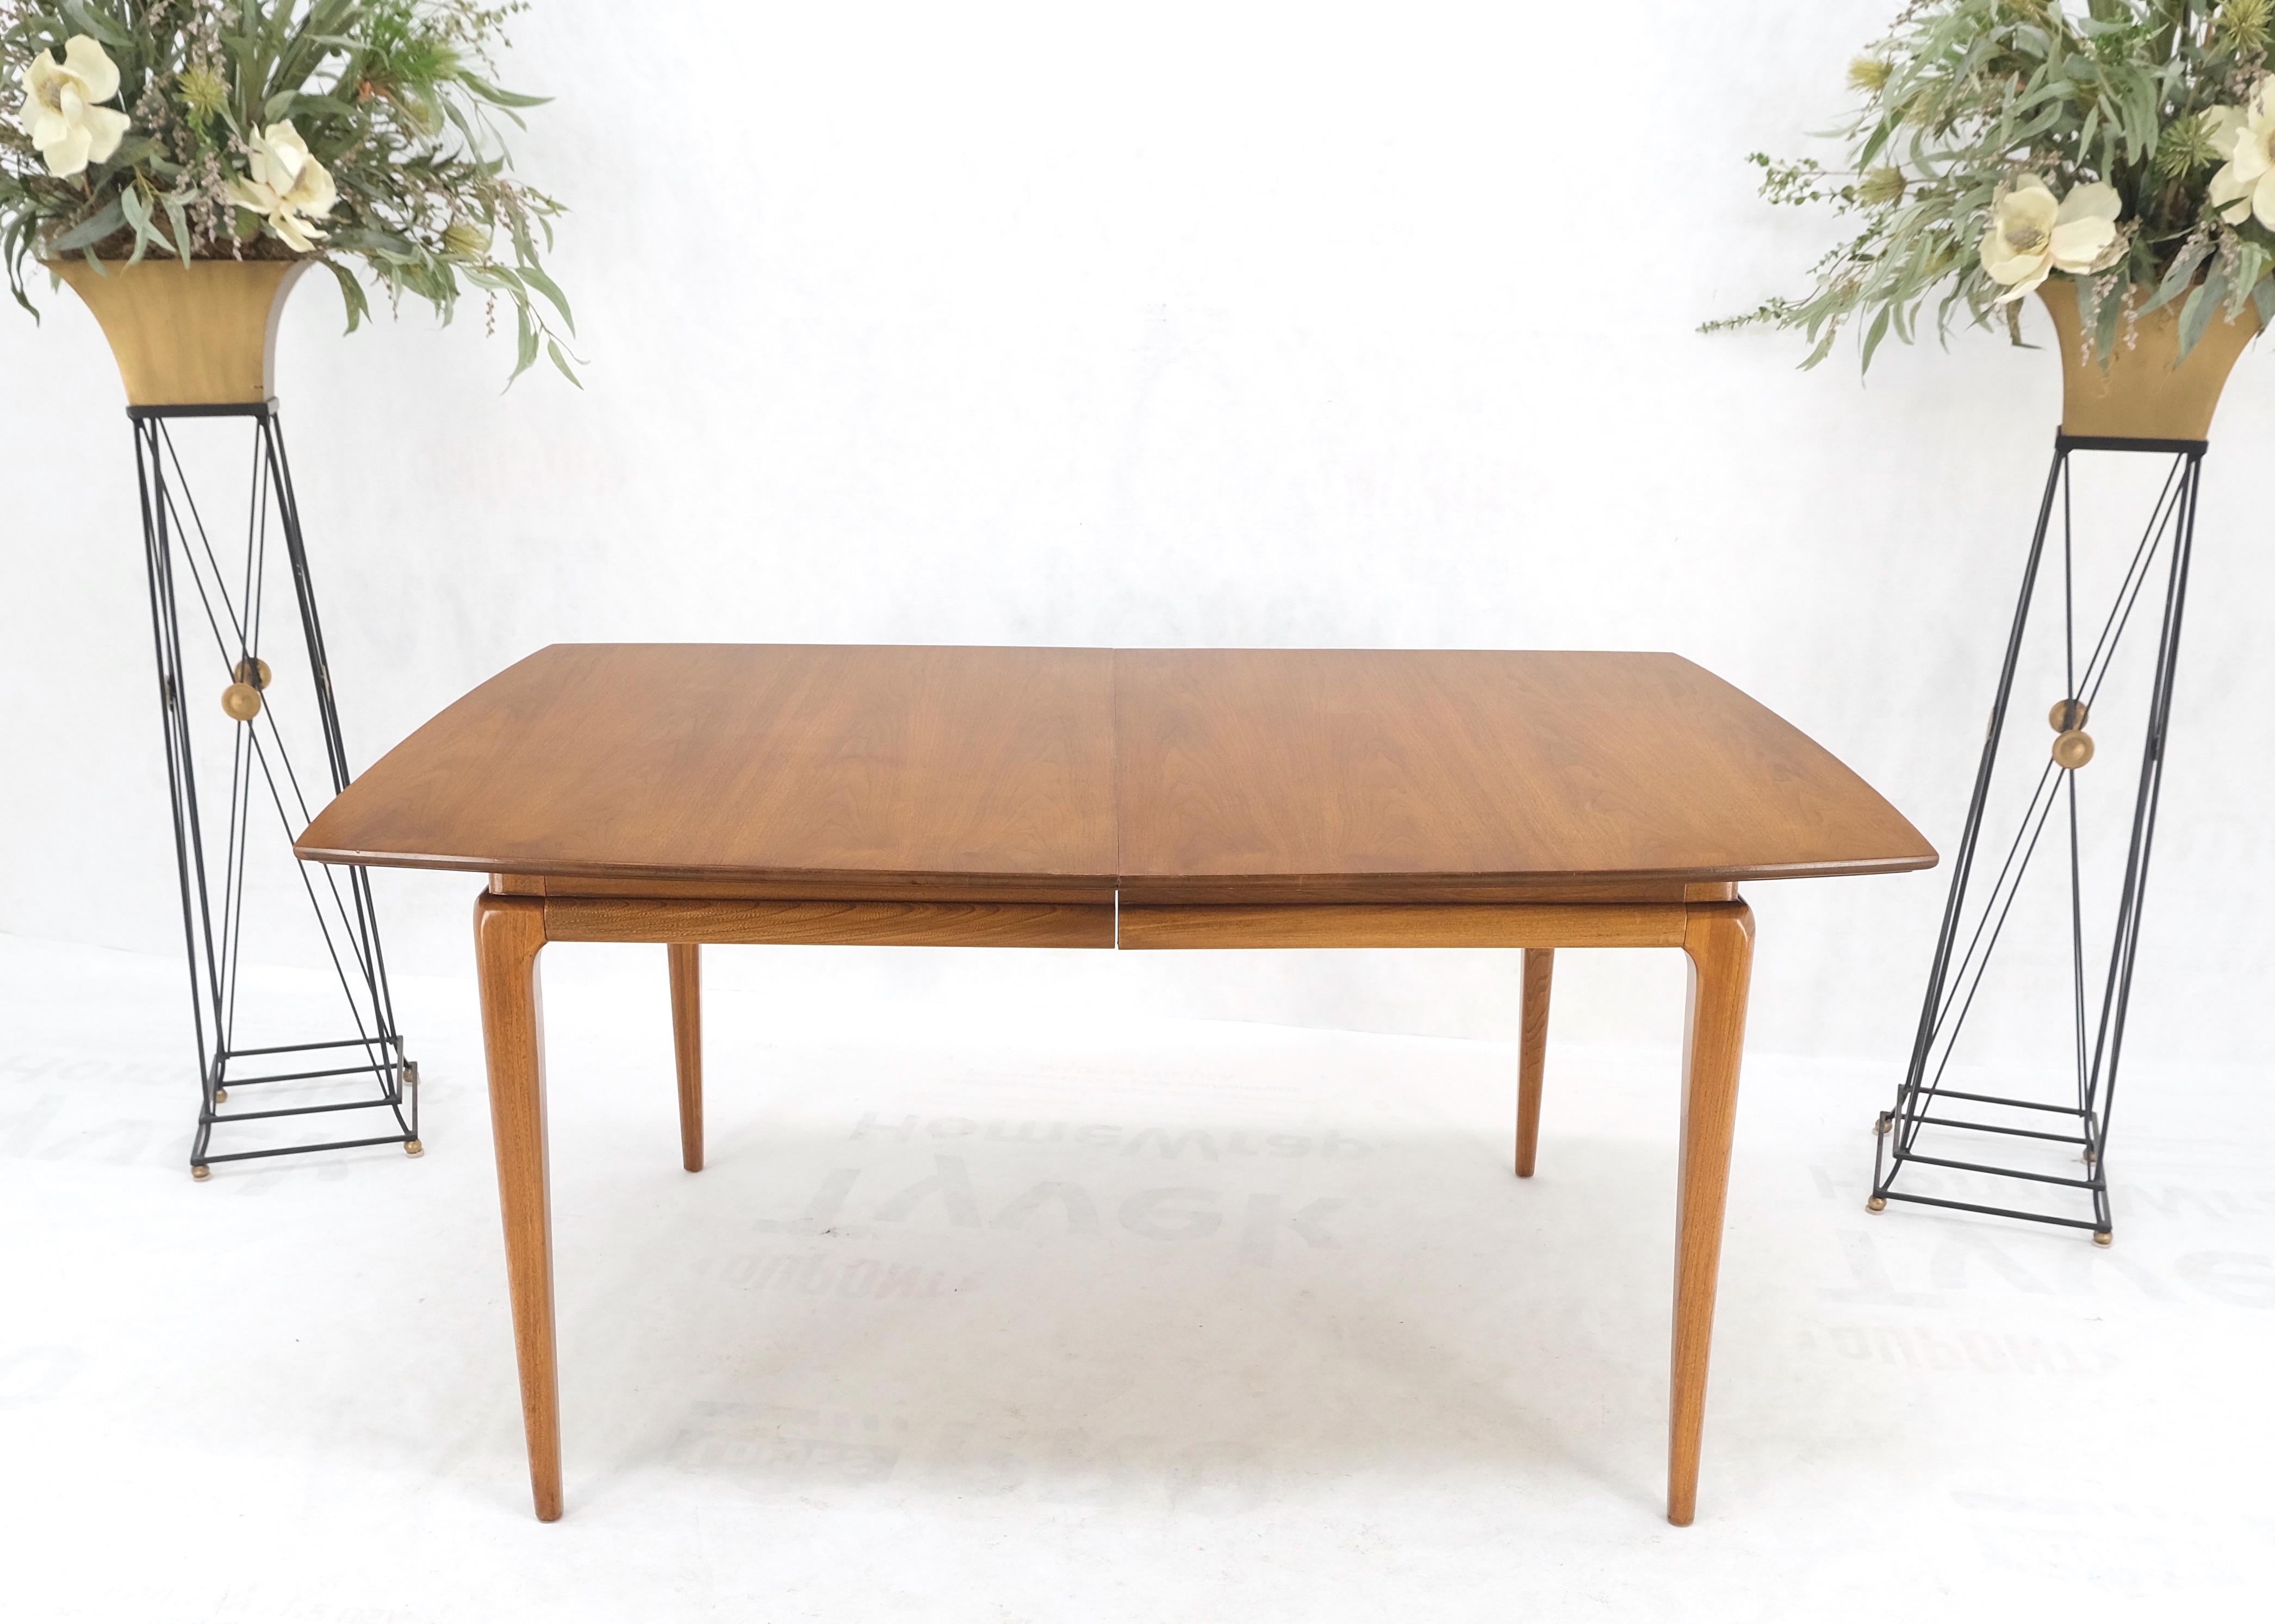 Light Walnut American Mid-Century Modern Boat Shape Dining Table 3 Leaves MINT!

Three leaves measuring 12 inches across each
Total length of table with leaves equals 97.5 inches.